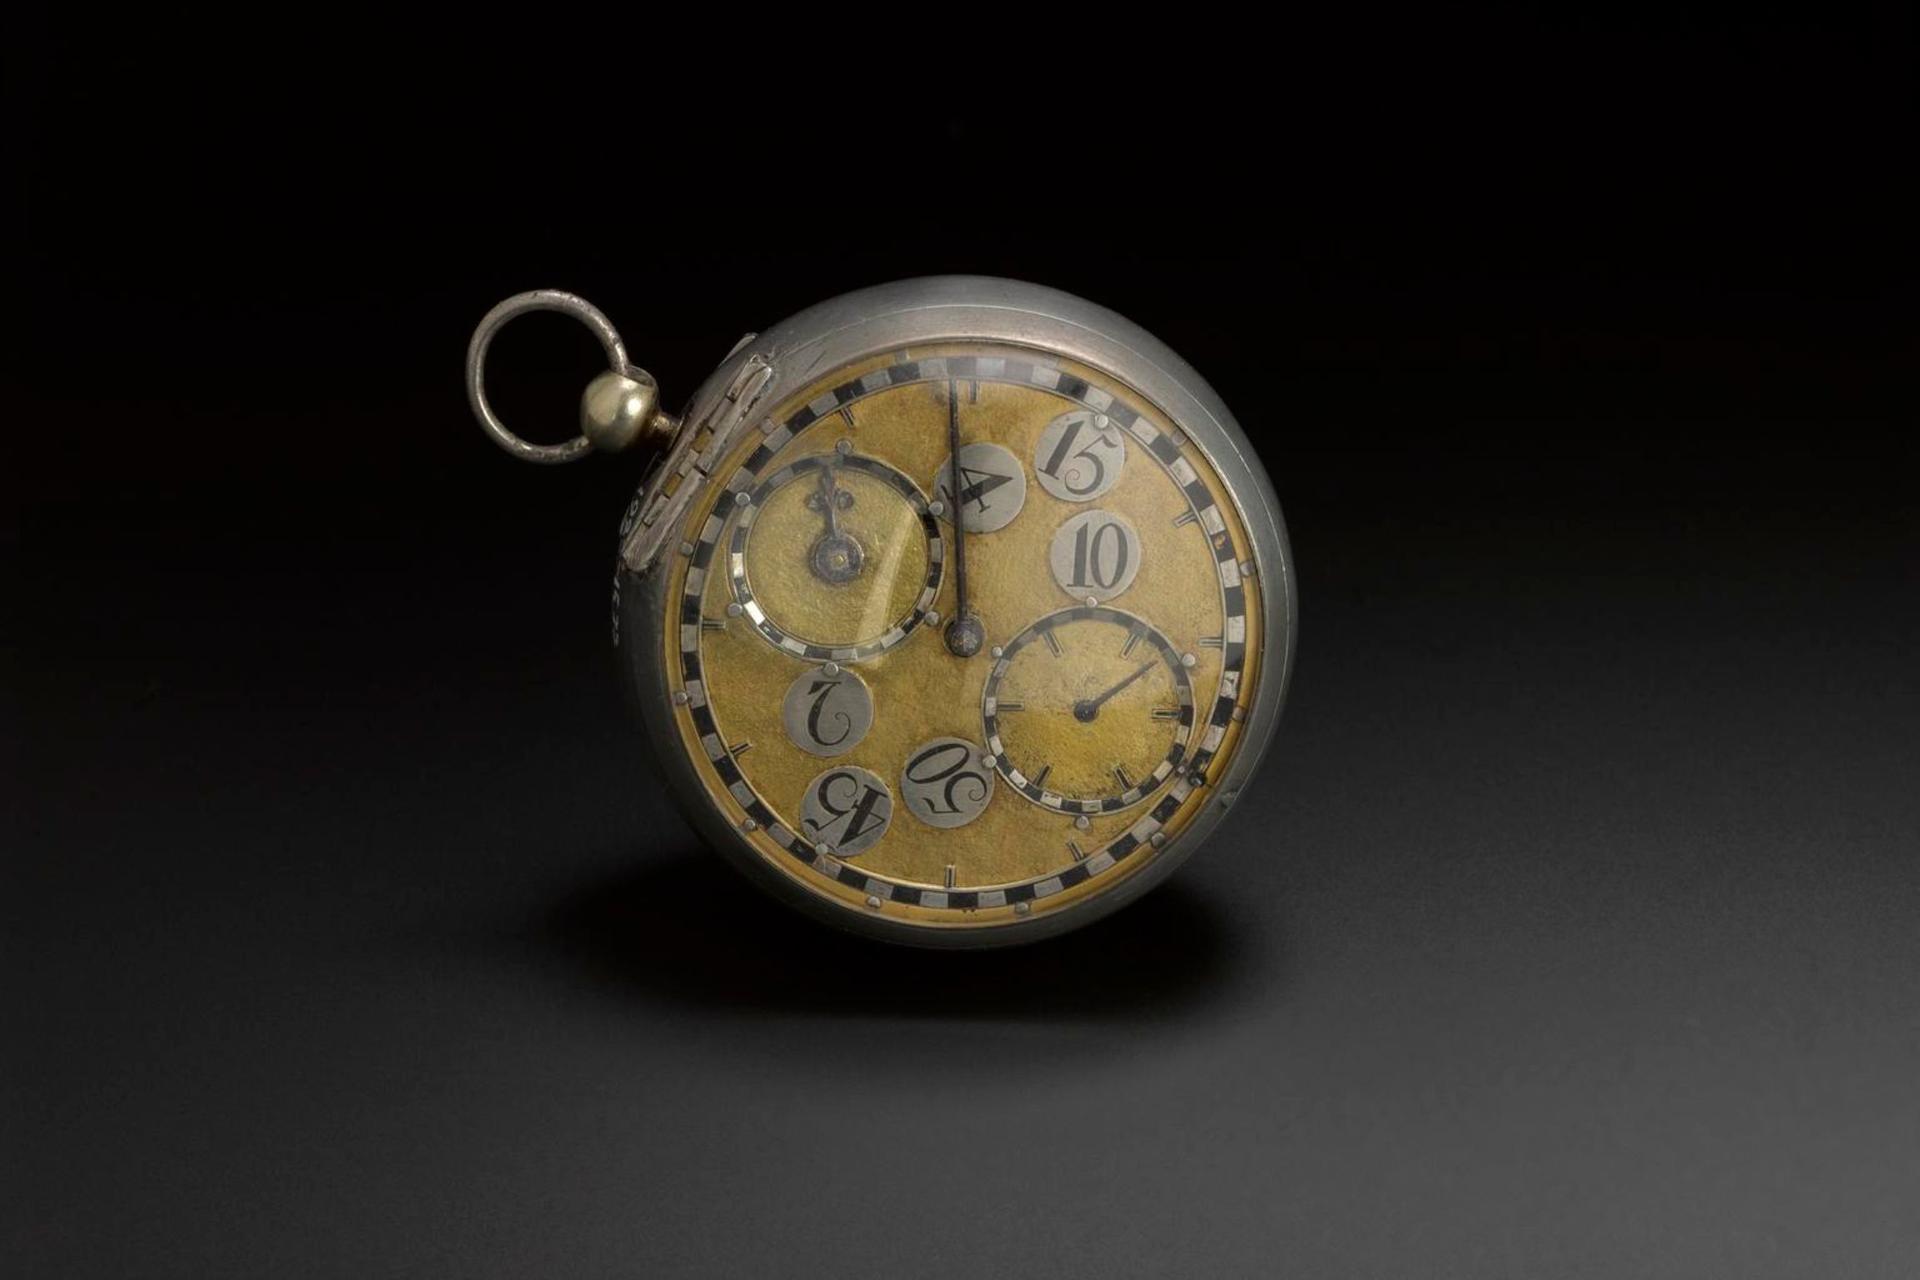 An early balance spring watch by Thomas Tompion with a 'Regulator' type dial, housed in a silver case, was made in London, England, between 1675 and 1679 Photo: Science Museum Group